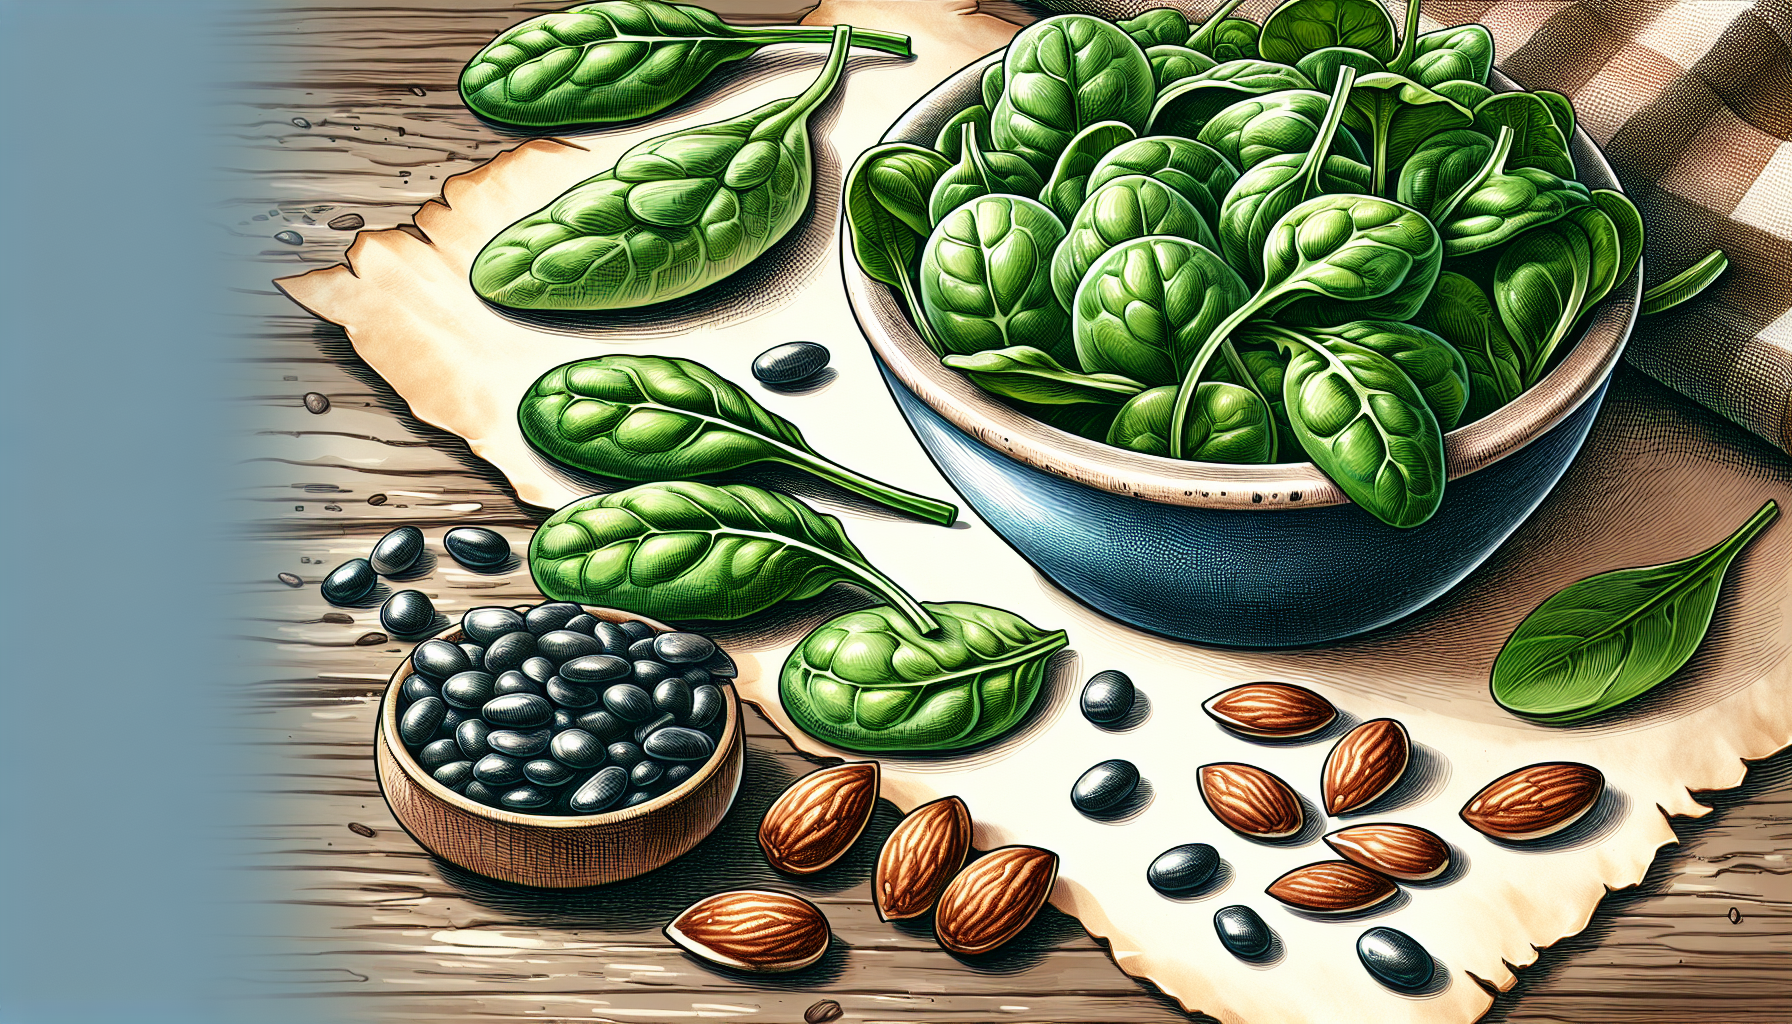 Magnesium-rich foods such as spinach, almonds, and black beans